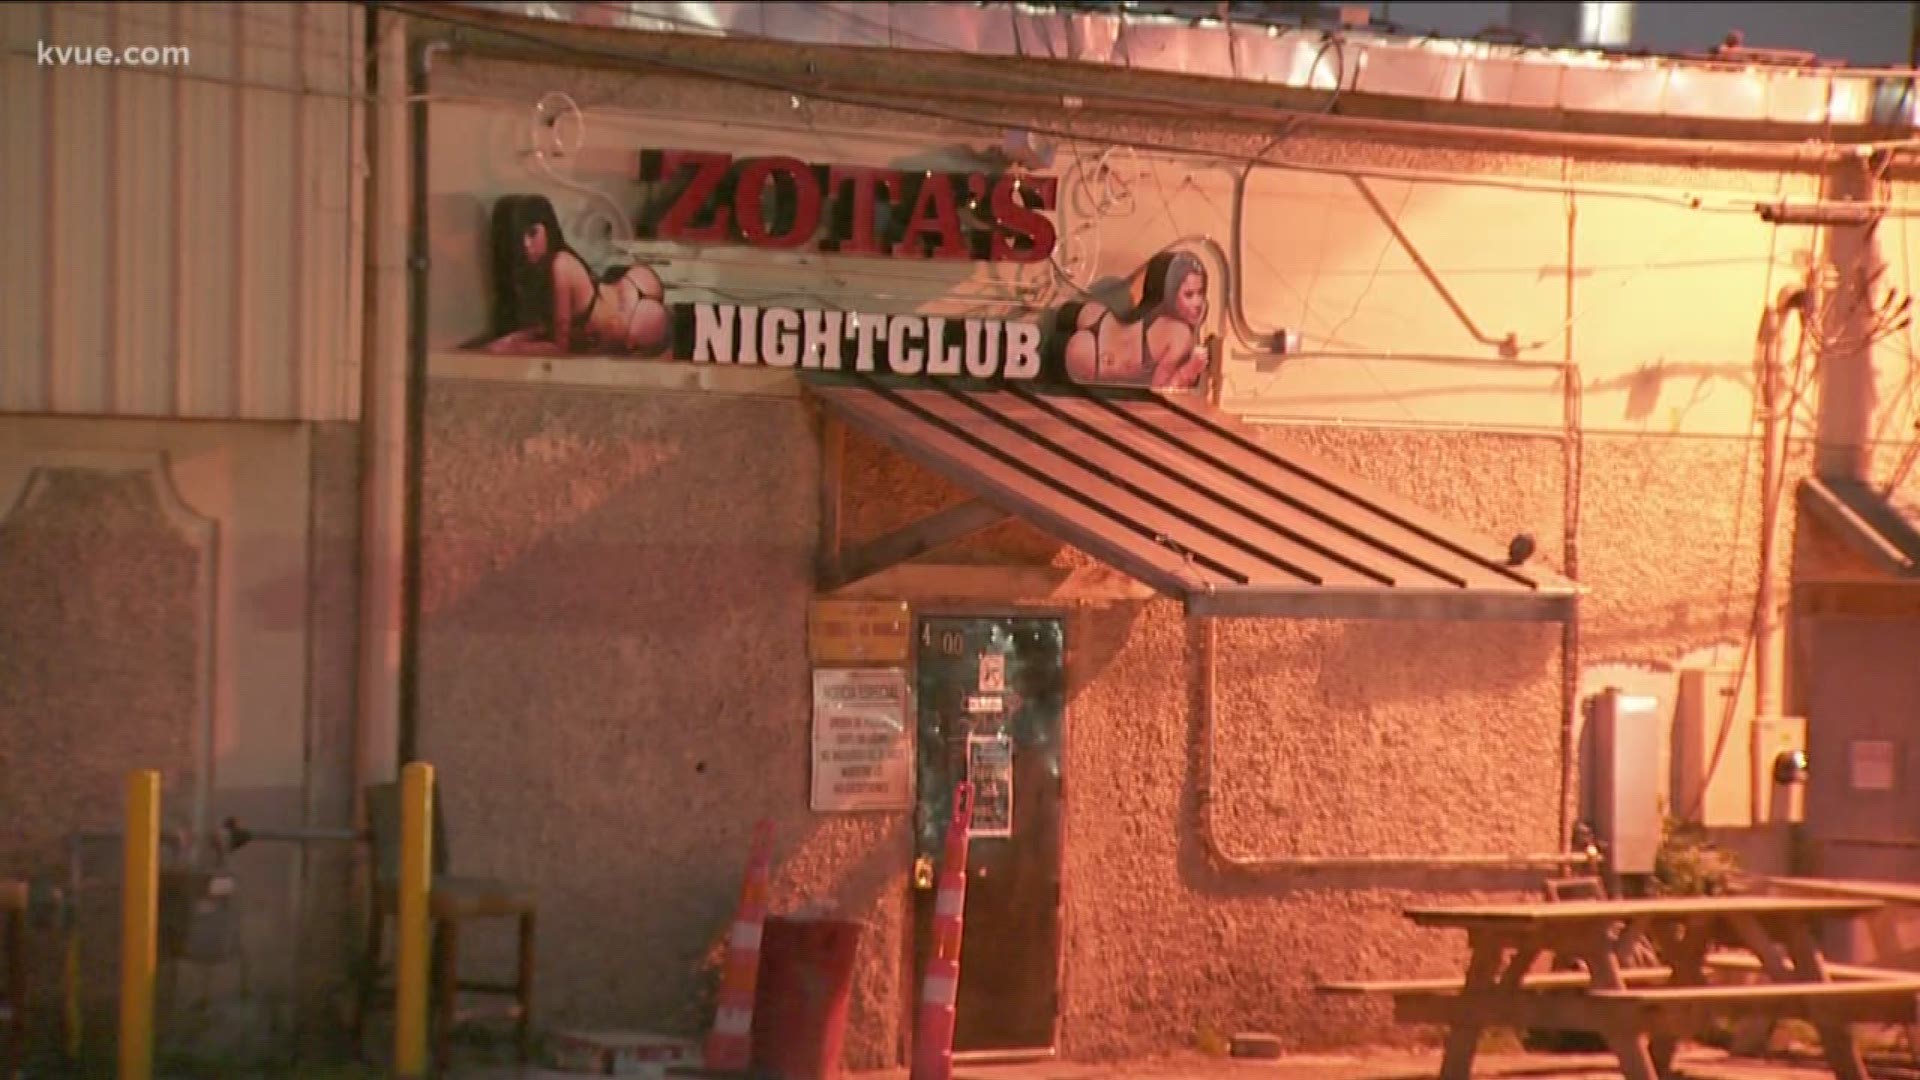 Club Casino and Zota's Nightclub lost their liquor permits after the investigation found they were allegedly involved with drugs, human trafficking and drink solicitation.